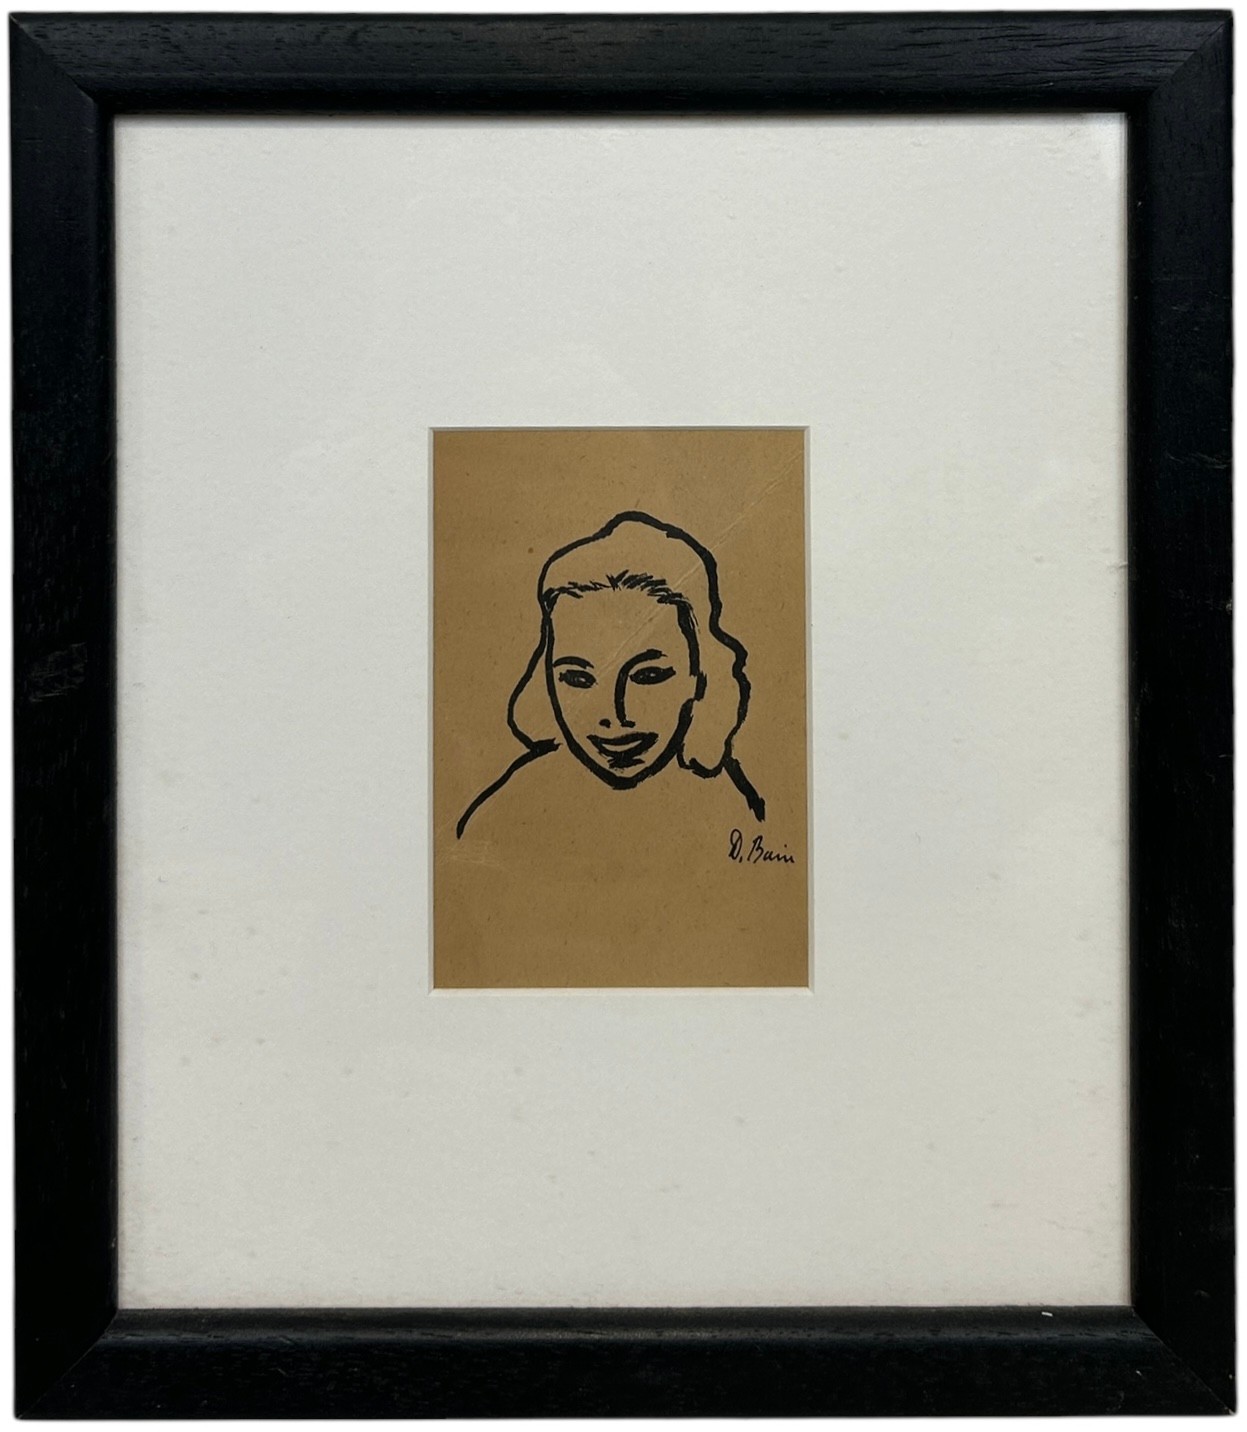 DONALD BAIN (SCOTTISH 1904-1979): A PEN ON PAPER DRAWING OF A LADY'S HEAD AND SHOULDERS, 11cm x